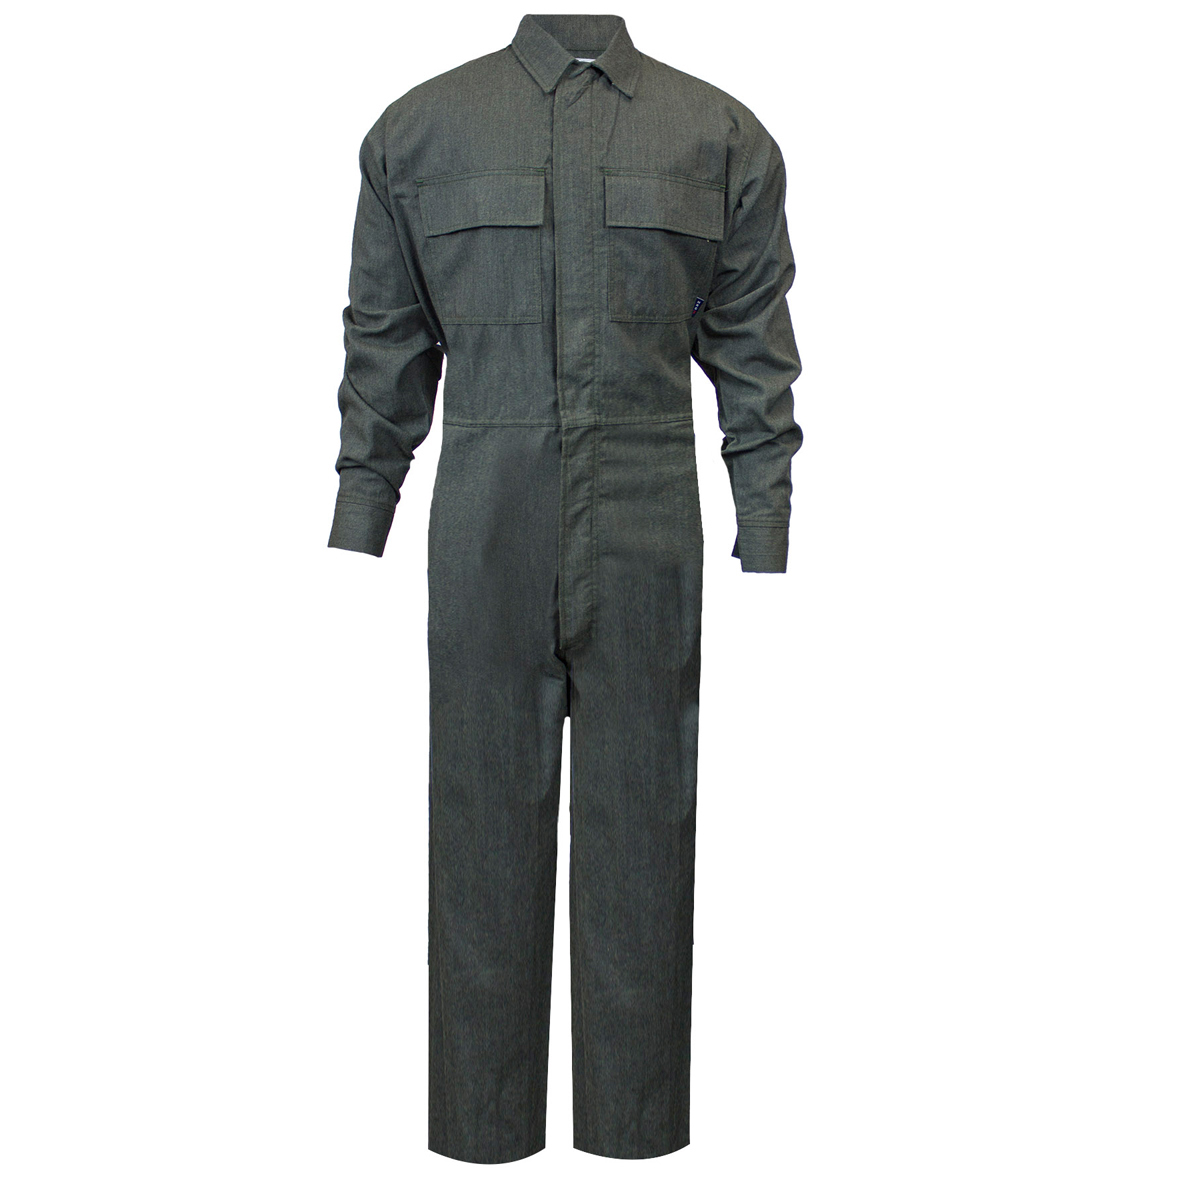 National Safety Apparel X-Large Regular Green OPF Blend Twill CARBON ARMOUR™ Welding Flame Resistant Coverall With Zipper Front